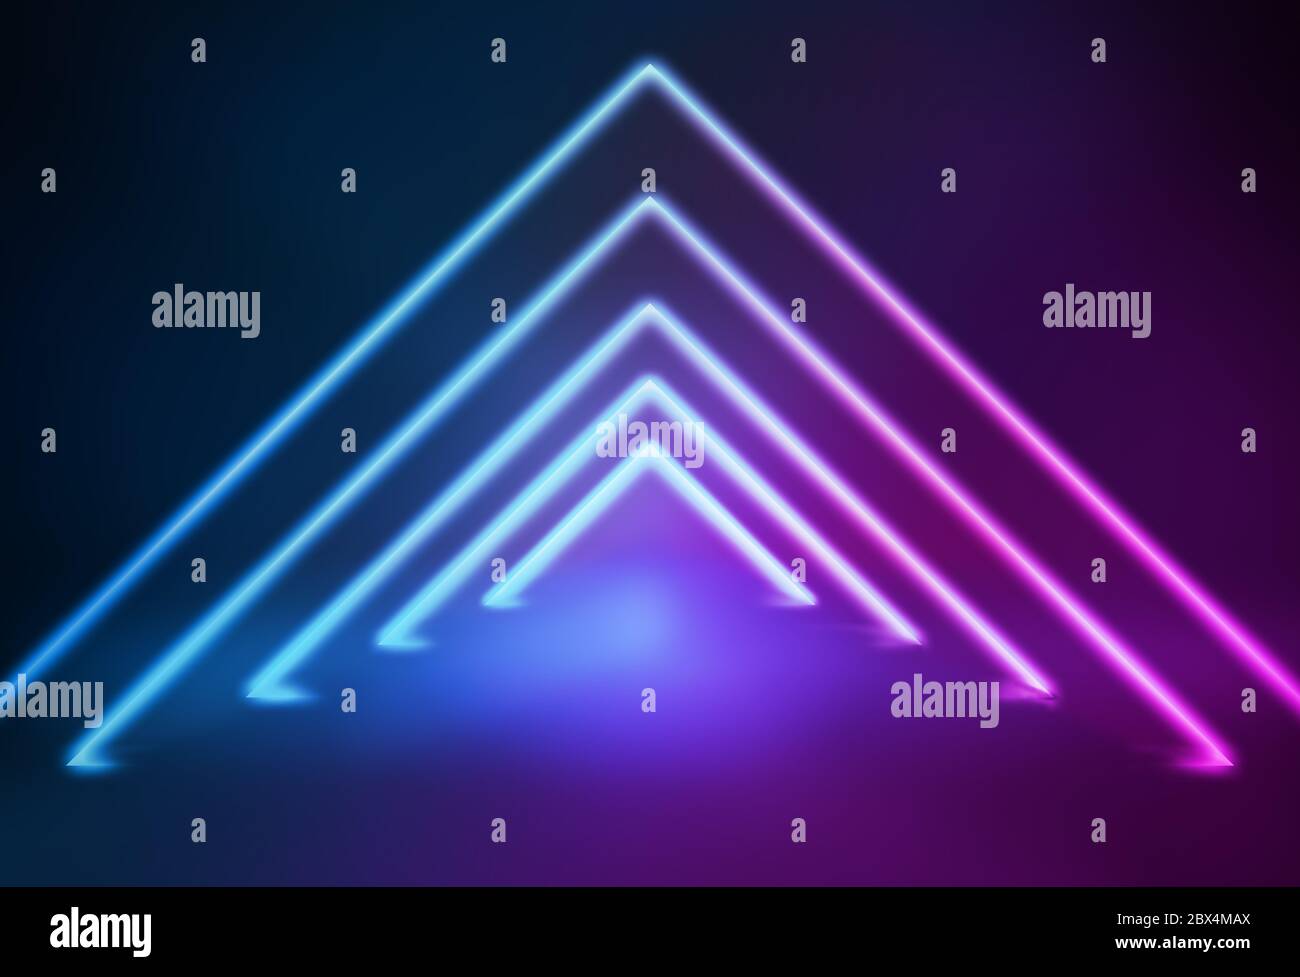 Channel space constructed by triangle glowing neon light lines. Stock Photo